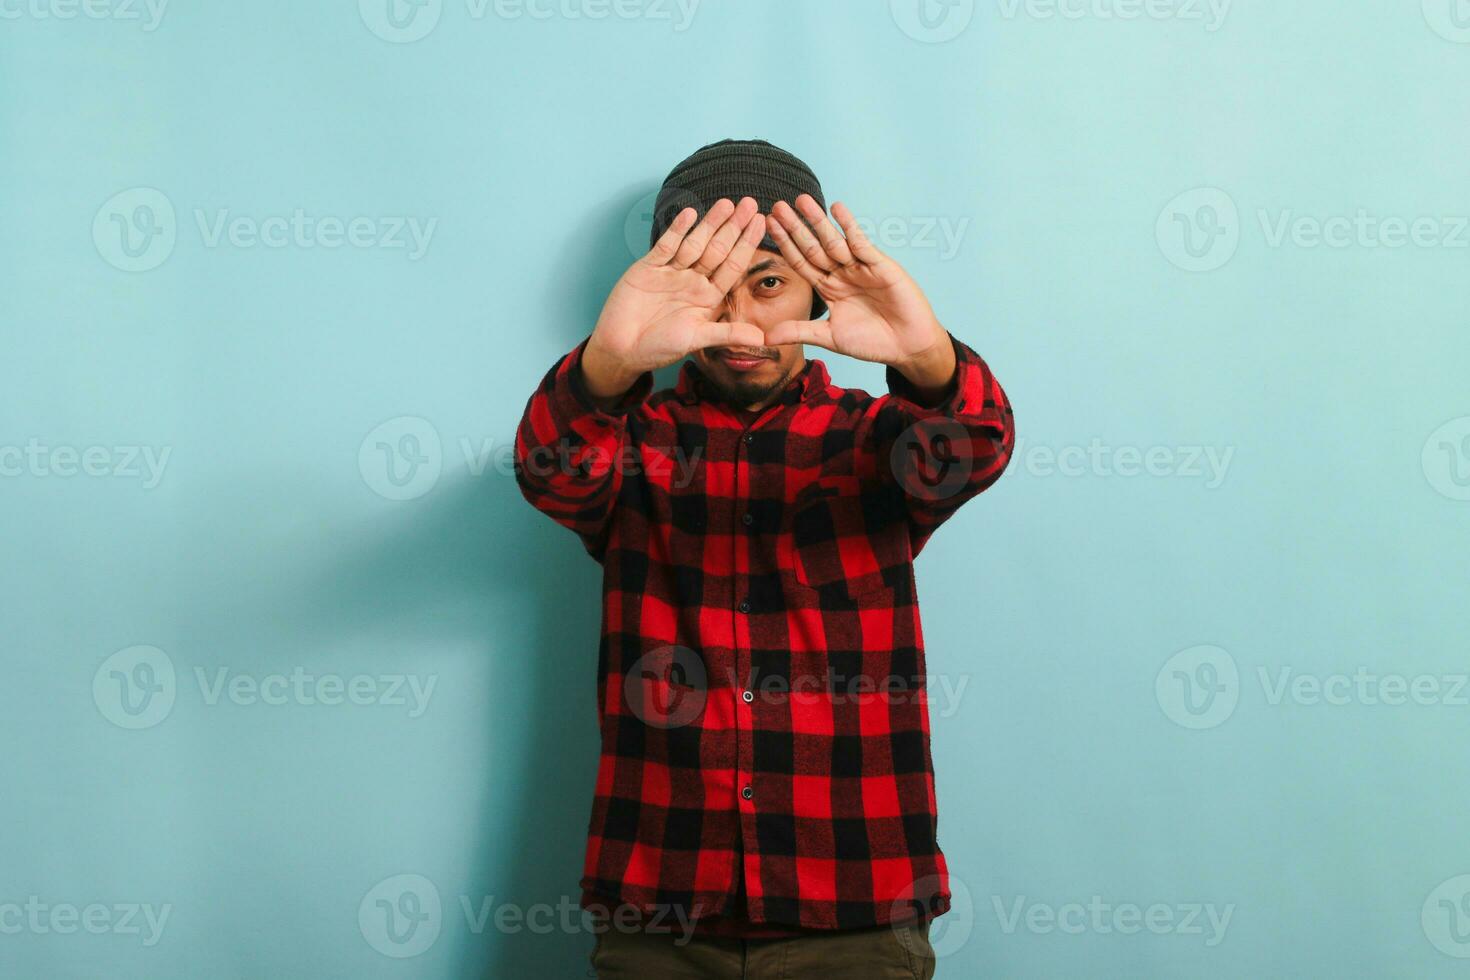 Young Asian man with beanie hat and red plaid flannel shirt making a triangle gesture with palms, symbolizing the environment protection, recycling, and reusing concept, isolated on a blue background photo